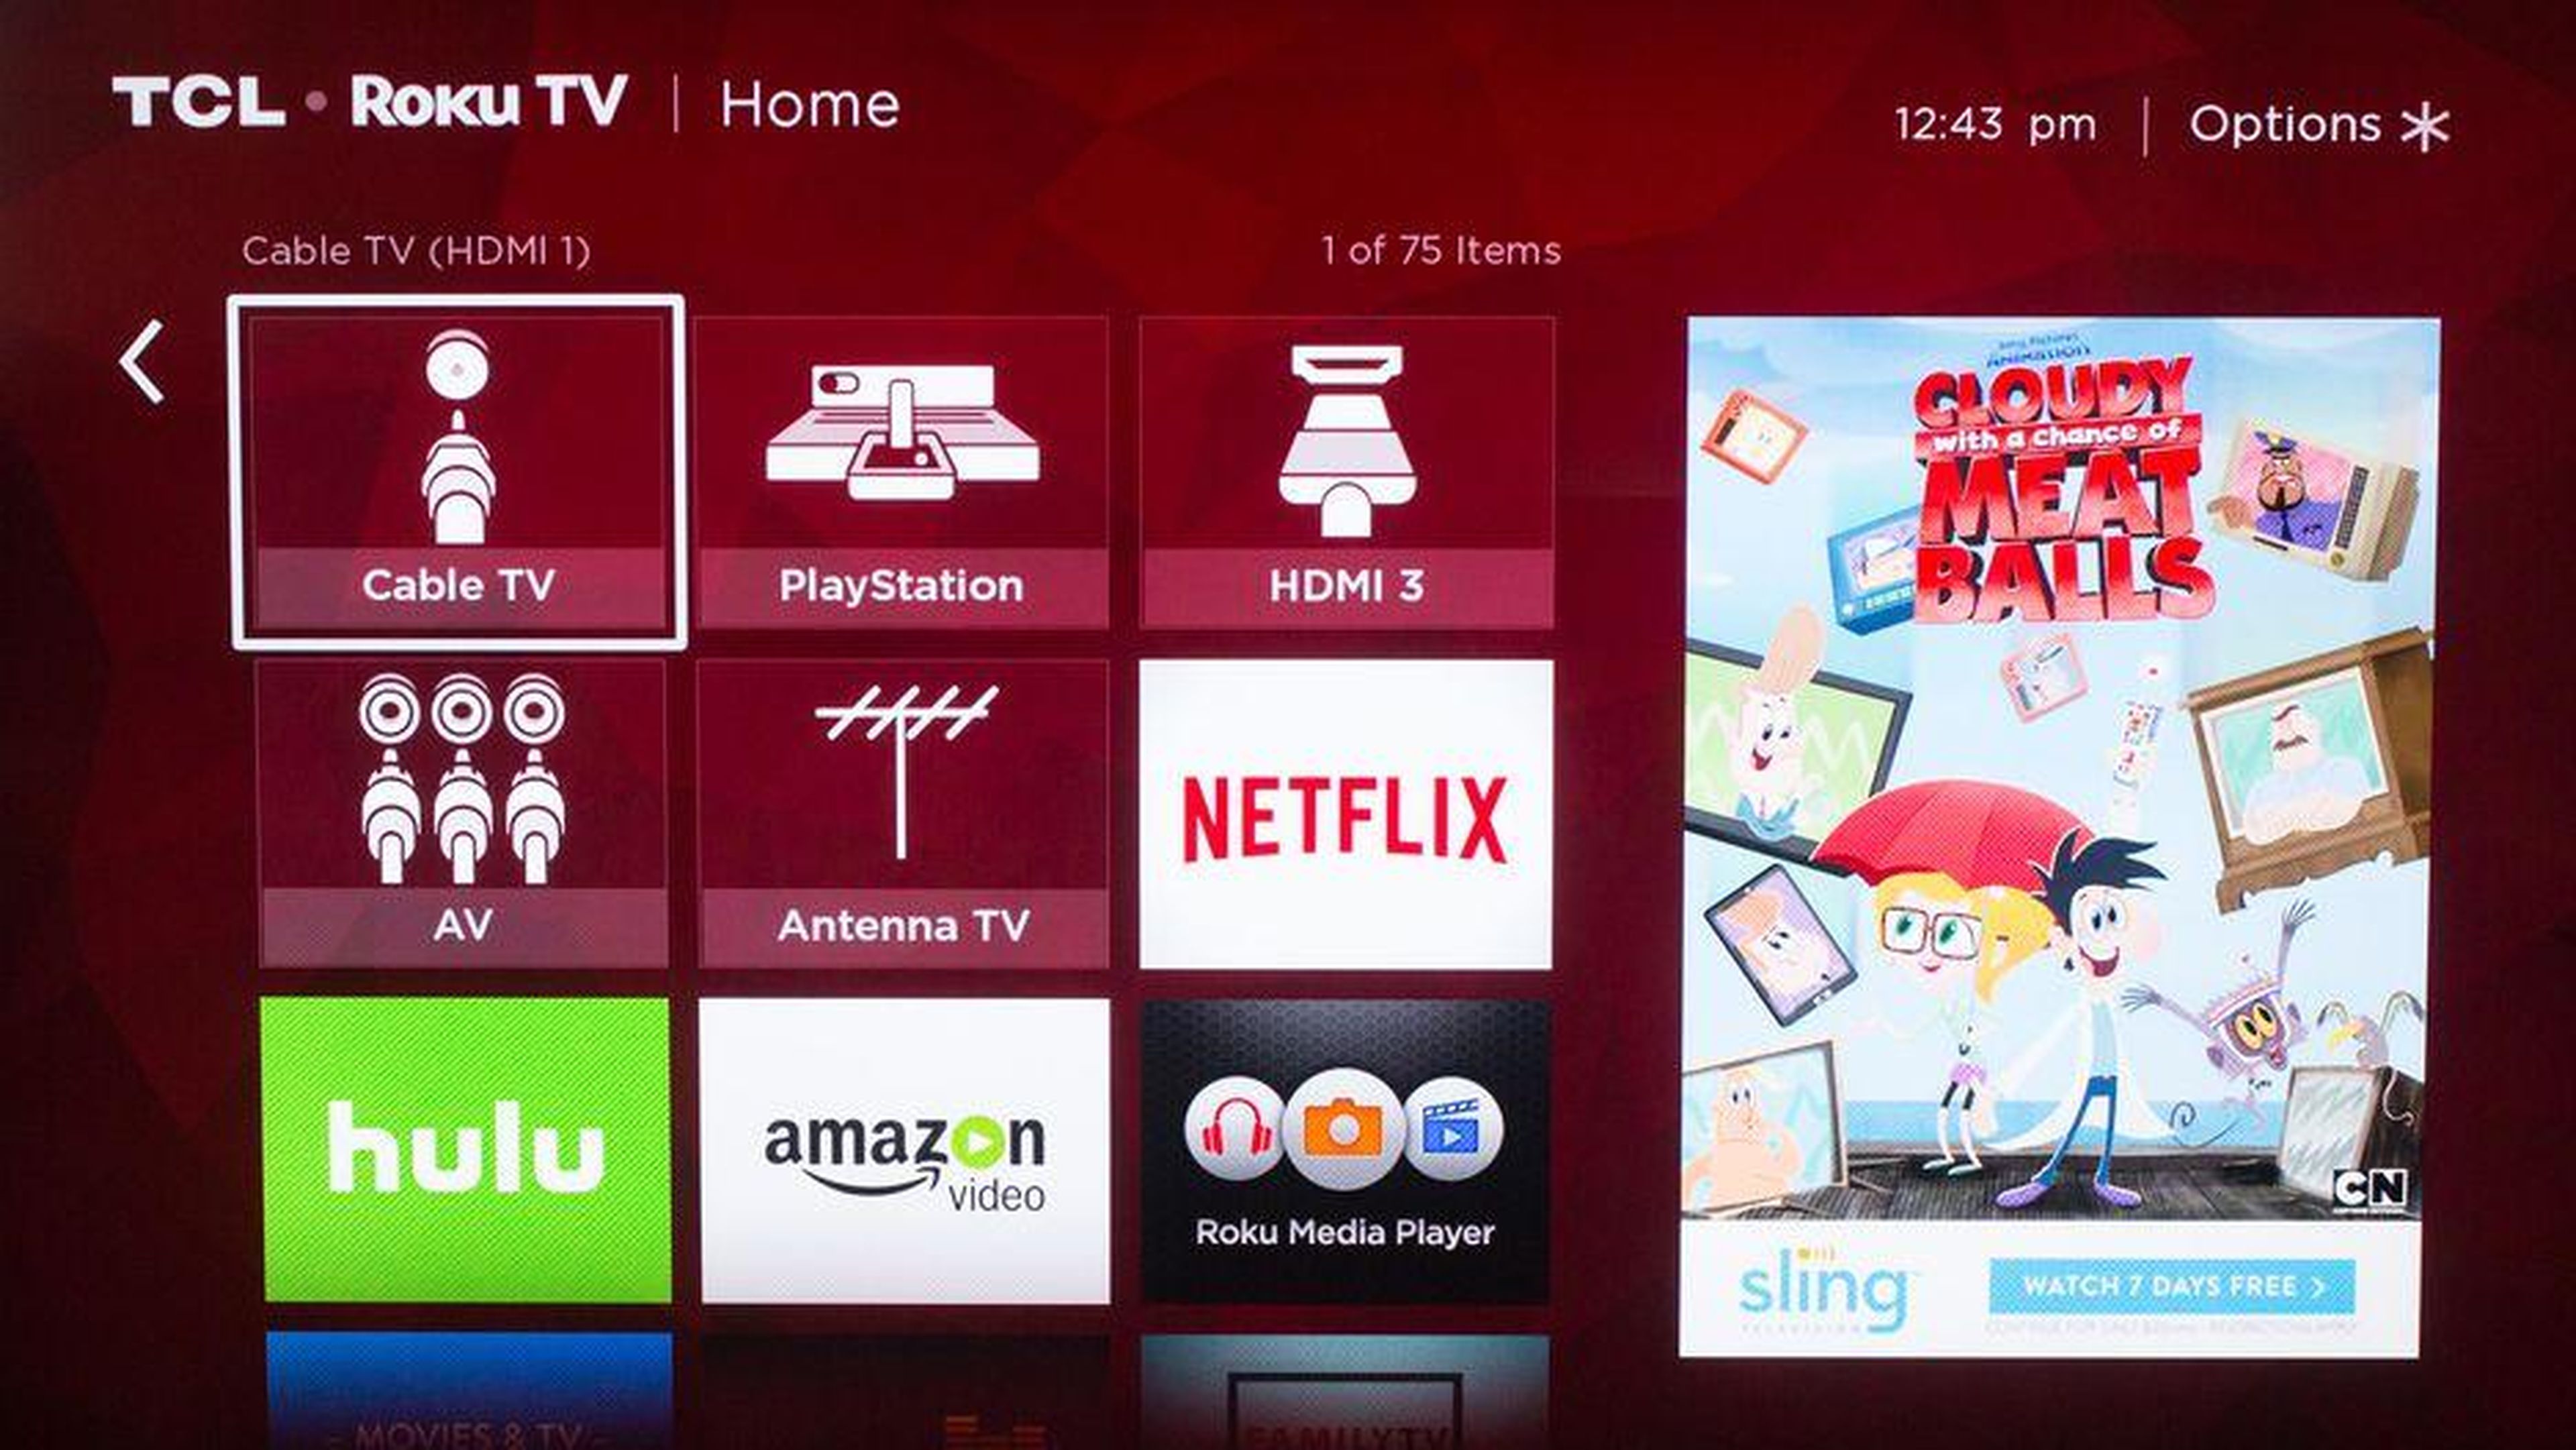 The Roku TV interface on TCL's smart TVs comes with a prominent ad placement on the home screen.